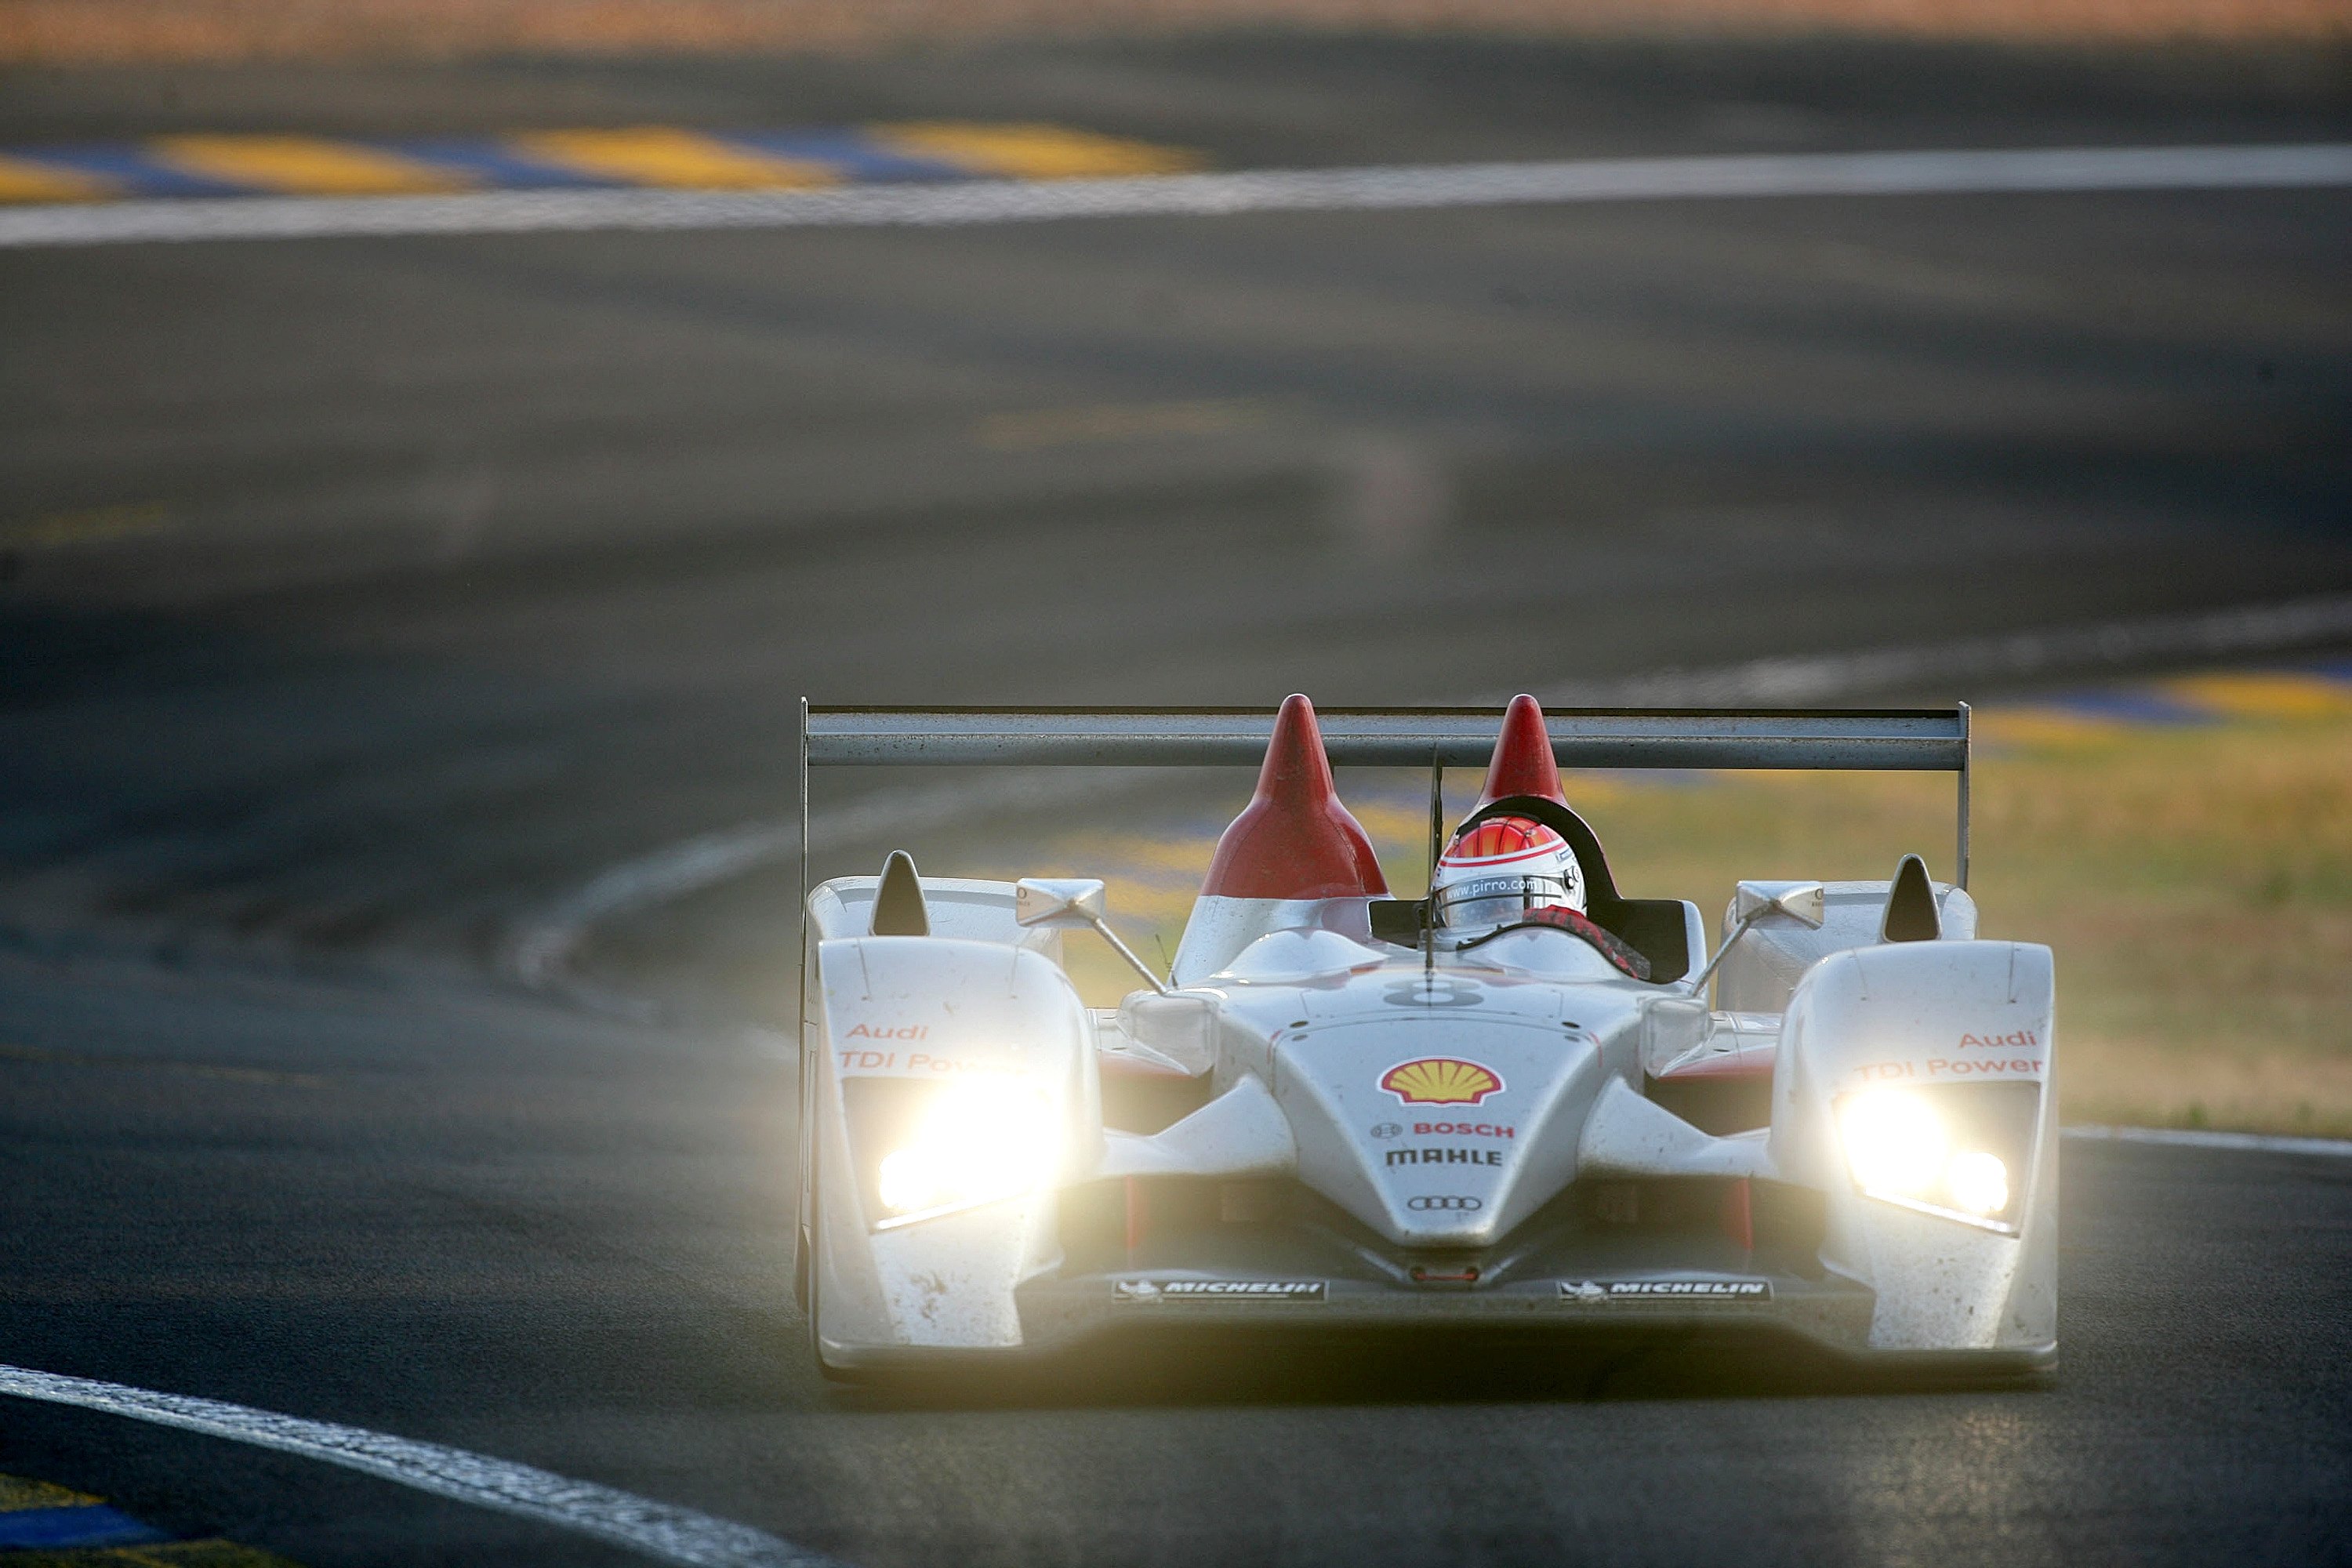 Audi's Emanuele Pirro during the ''Le Mans 24h Race'' at the Le Sarthe Circuit on June 17, 2006 in Le Mans, France. Image: John Marsh / Getty Images